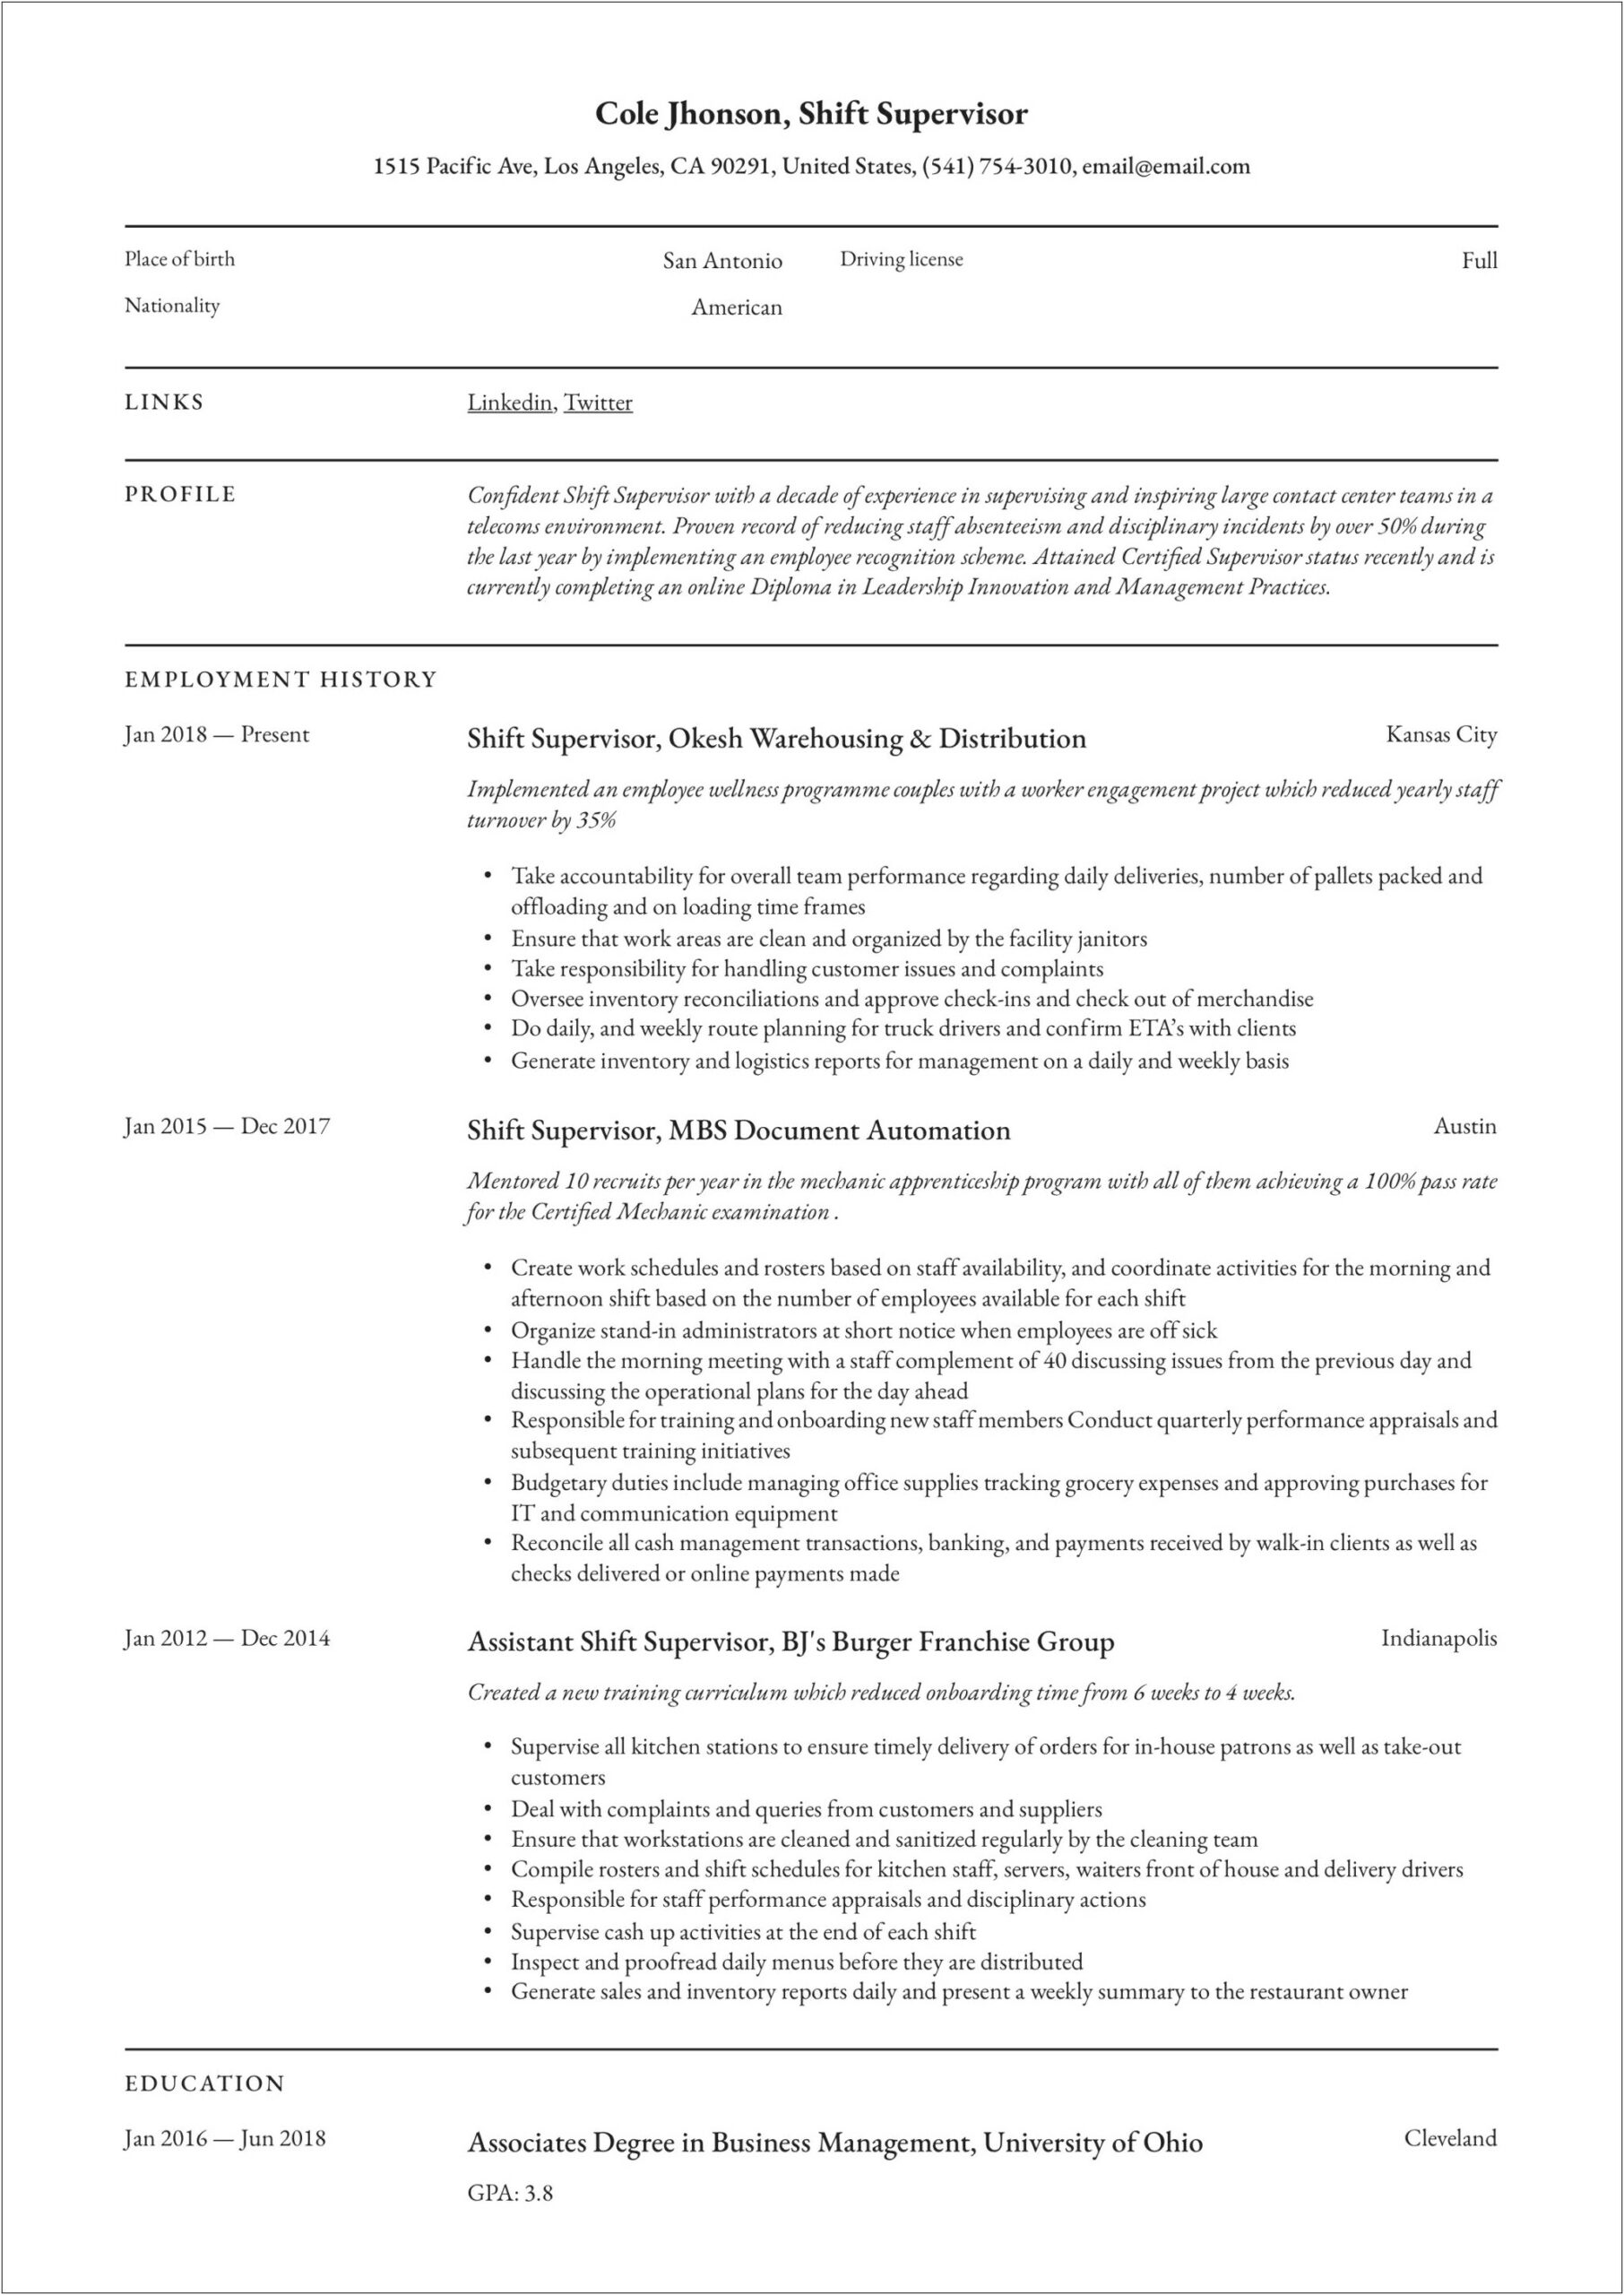 Sample Resume With Supervisor Experience